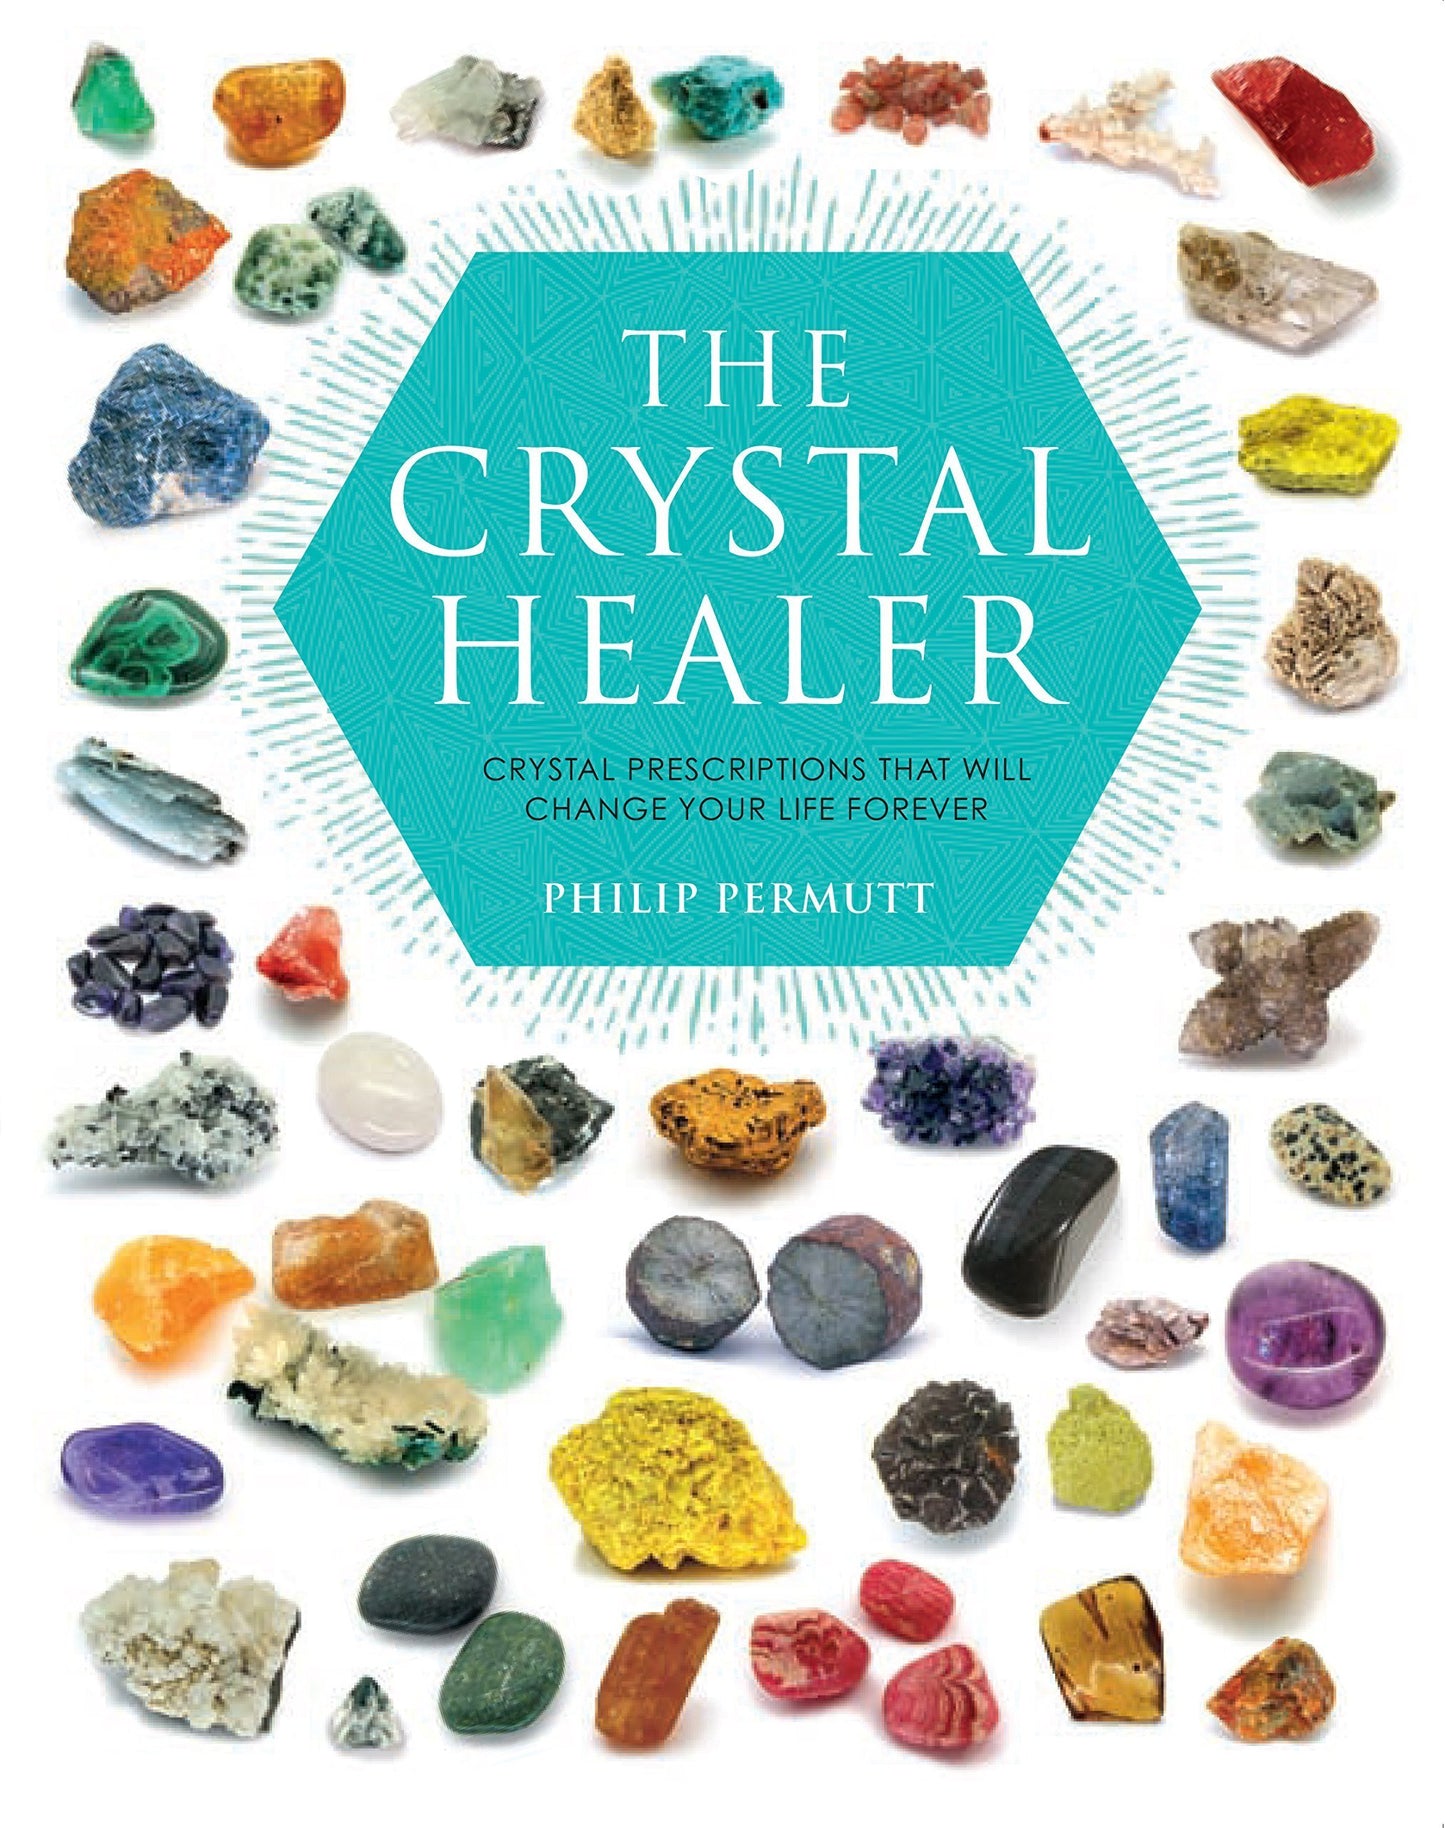 The Crystal Healer : Crystal prescriptions that will change your life forever